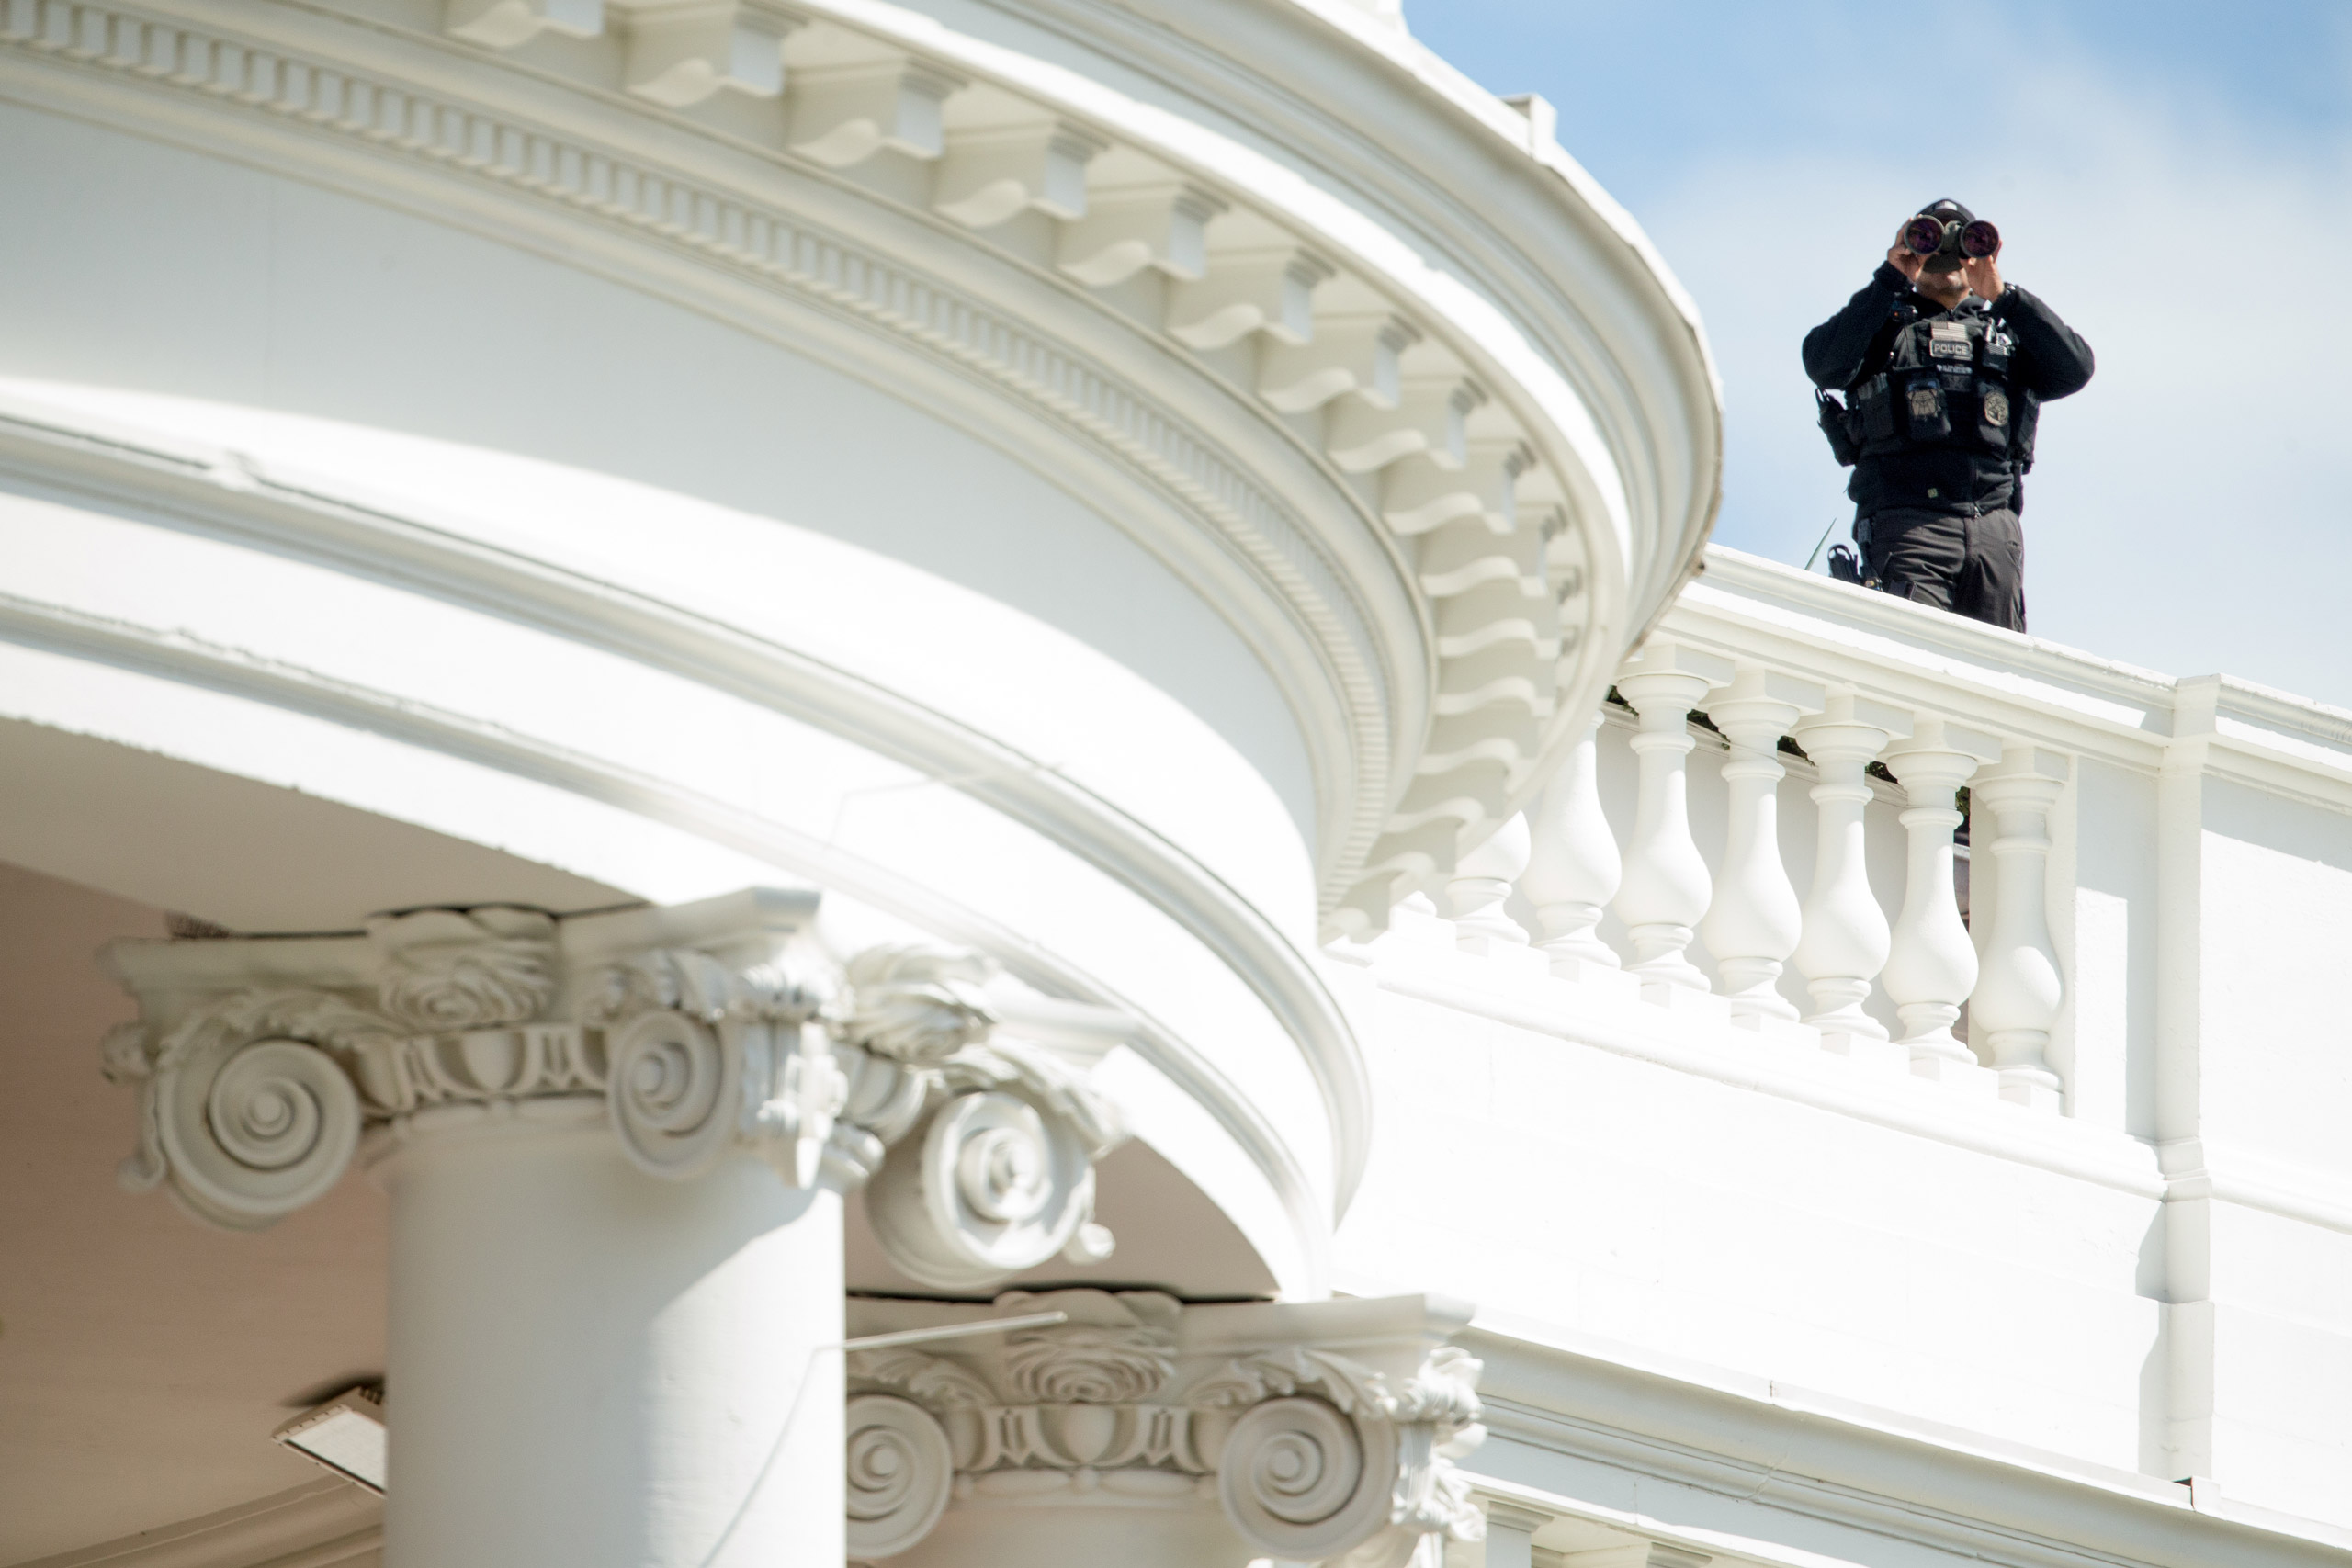 A member of the Secret Service stands on the roof of the White House during the White House Easter Egg Roll on the South Lawn in Washington, Monday, March 28, 2016. Thousands of children gathered at the White House for the annual Easter Egg Roll. This year's event features  live music, sports courts, cooking stations, storytelling, and Easter egg rolling. (AP Photo/Andrew Harnik)